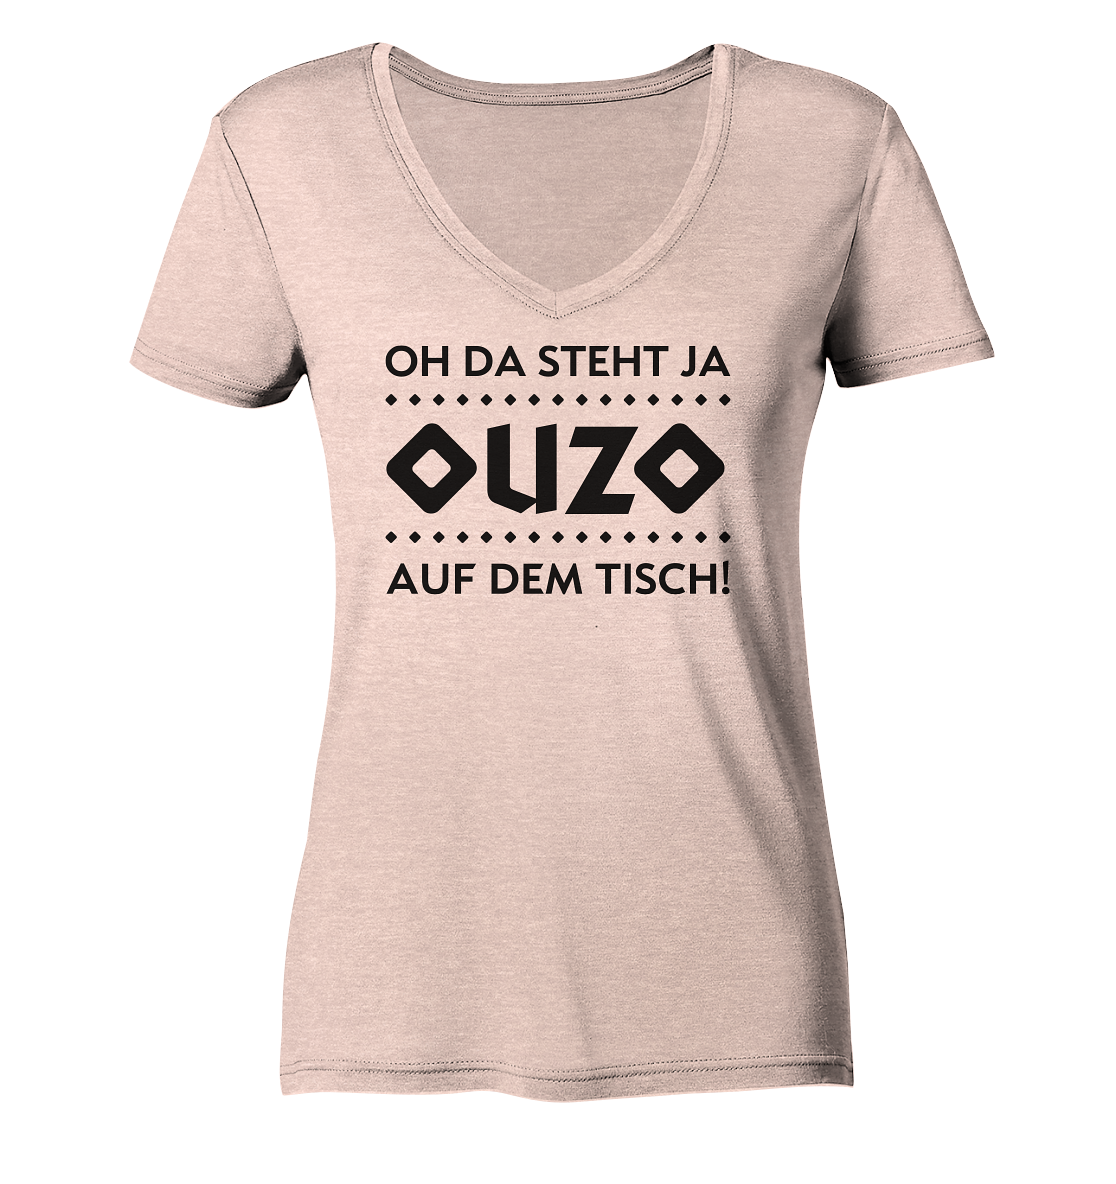 Oh, there’s ouzo on the table! - Ladies Organic V-Neck Shirt